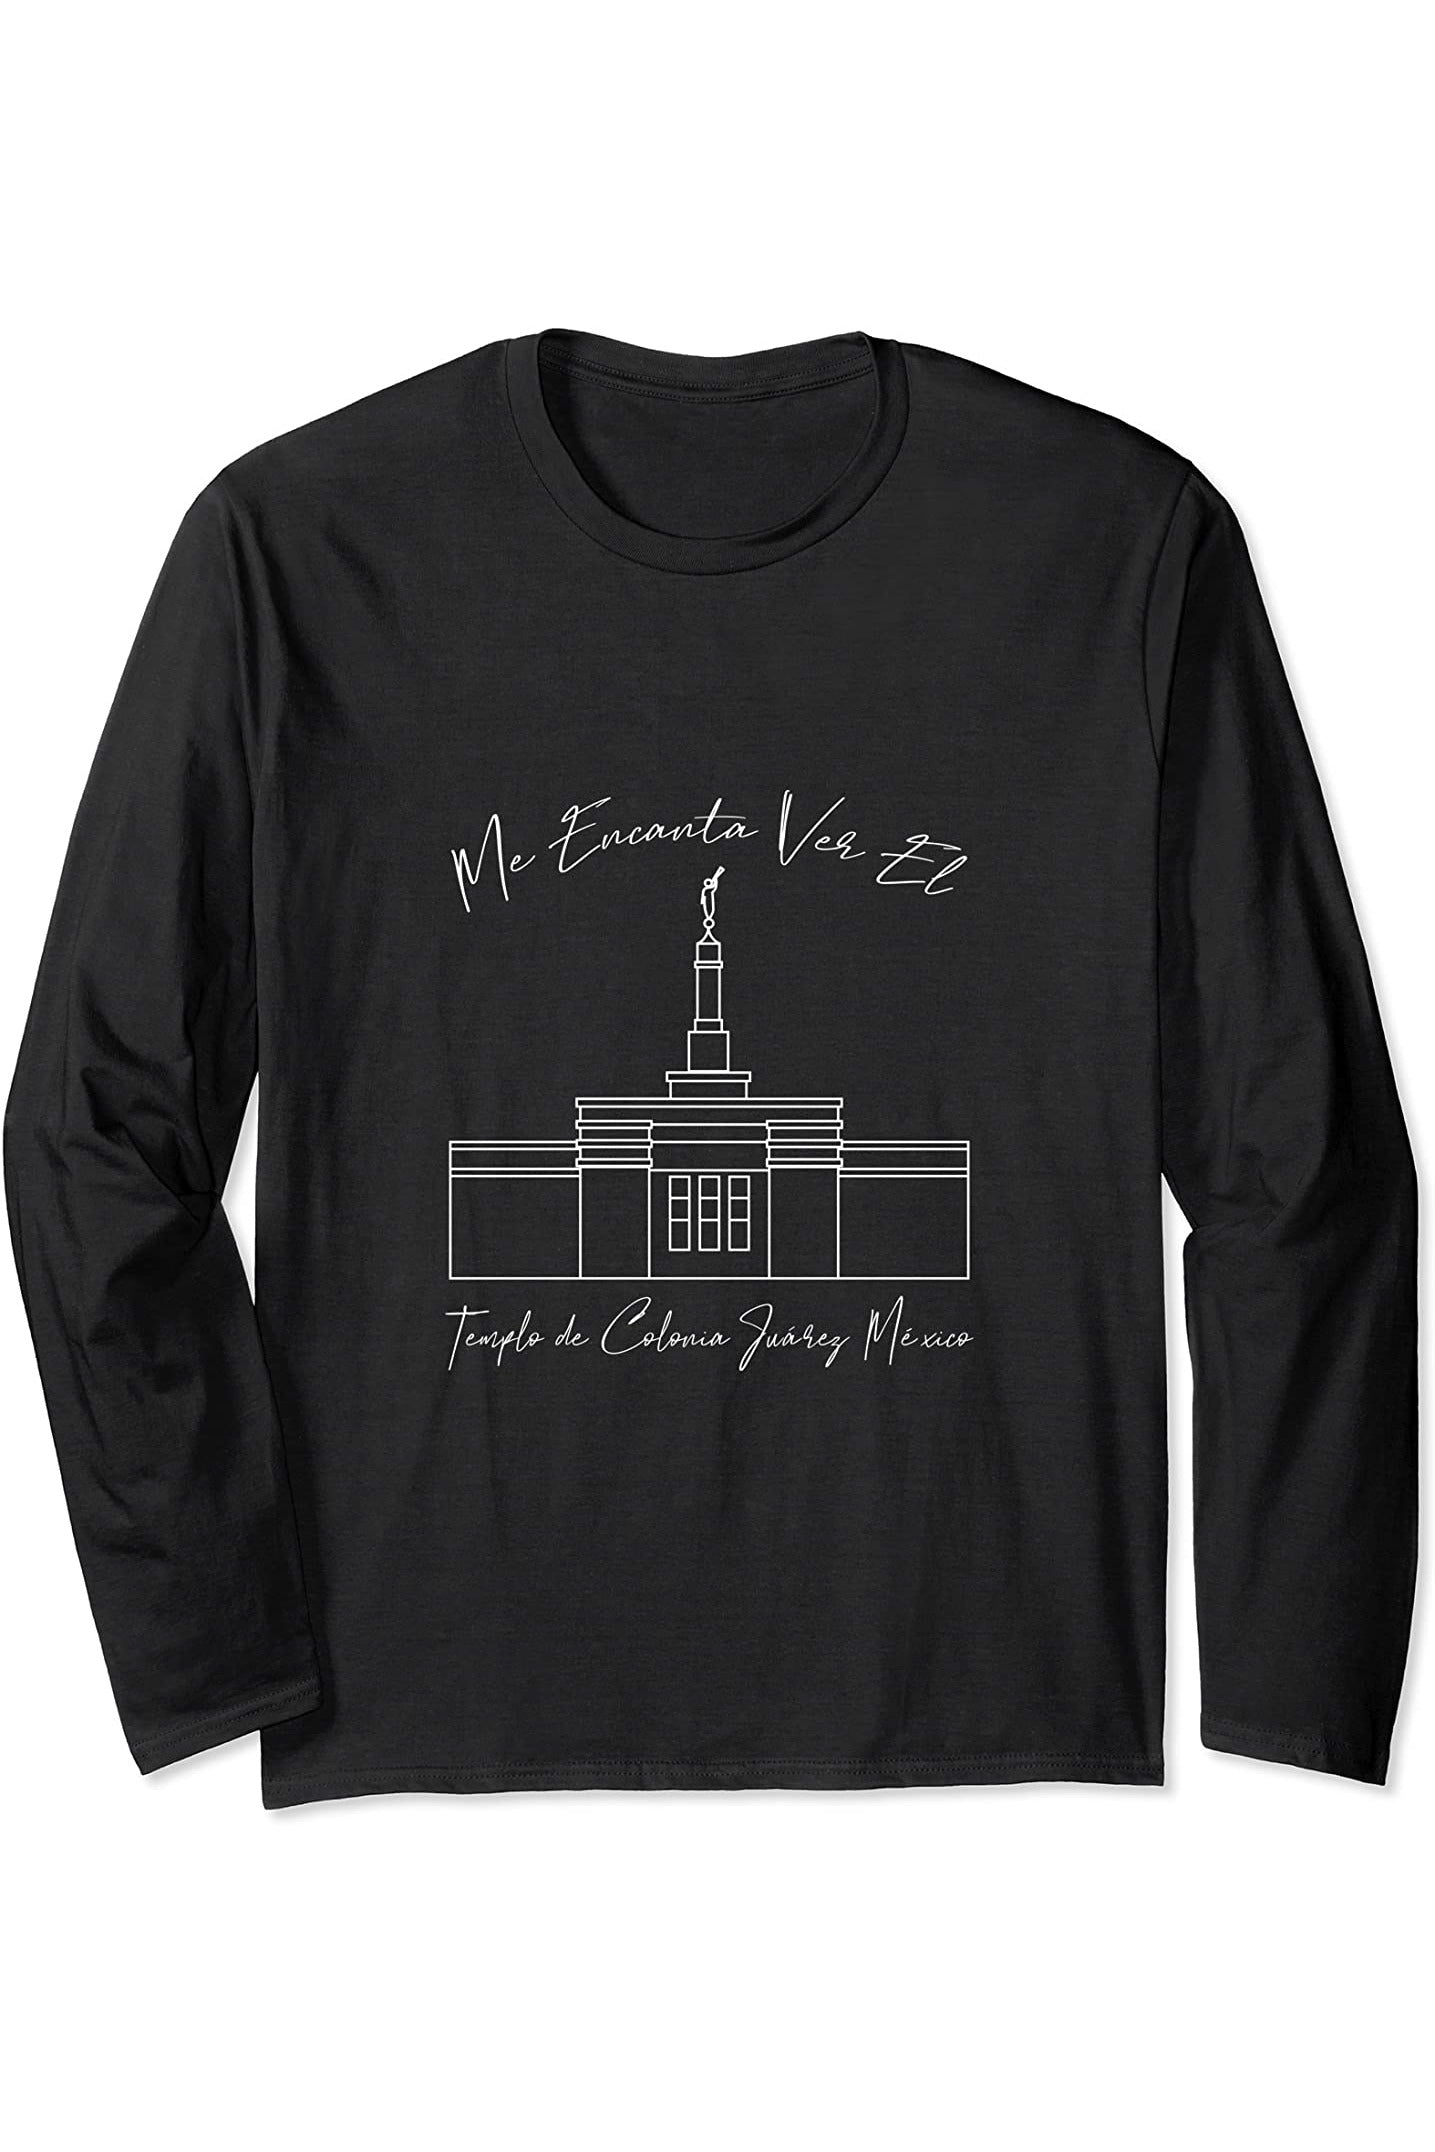 Colonia Juarez Chihuahua Mexico Temple Long Sleeve T-Shirt - Calligraphy Style (Spanish) US